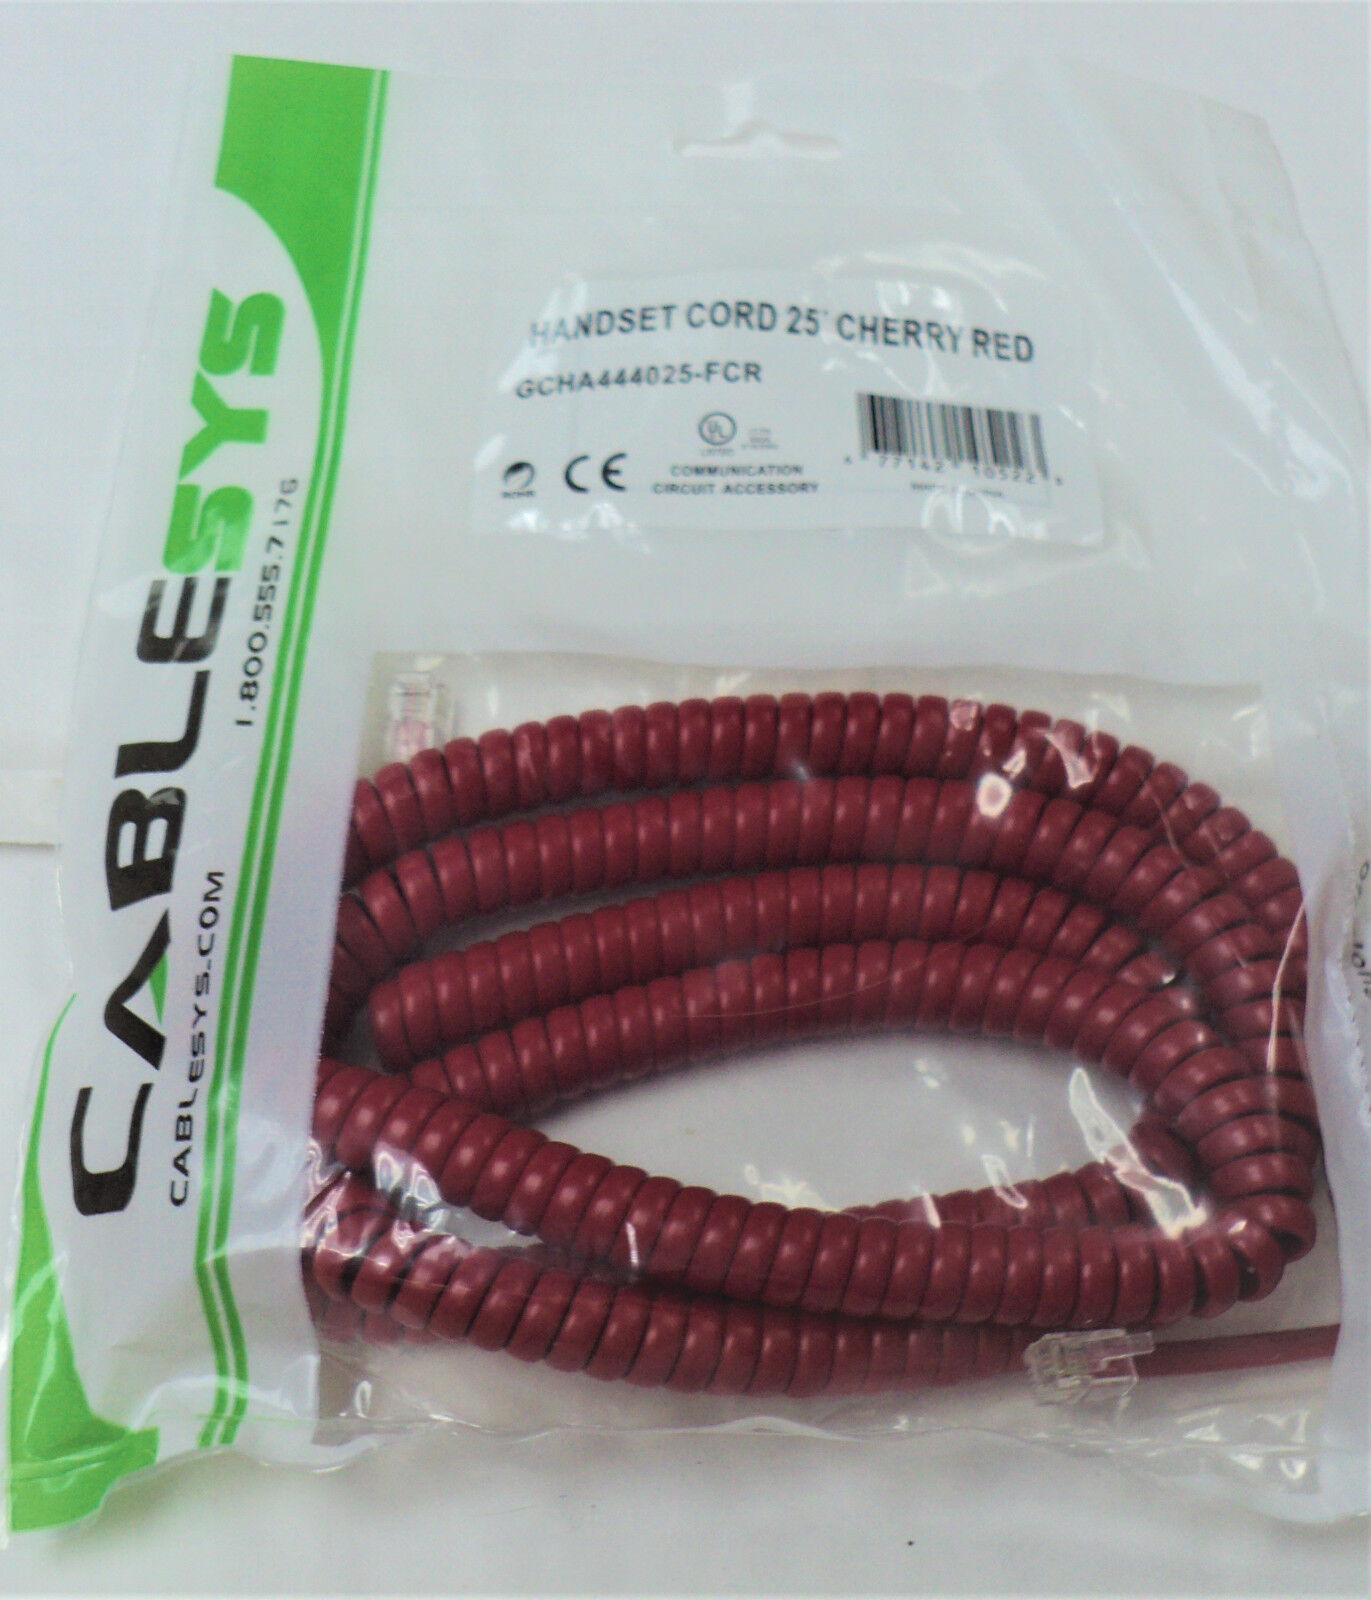 Cherry Red Long Handset Cord Vintage Phone Receiver Curly Cablesys 2500RD 25 Ft